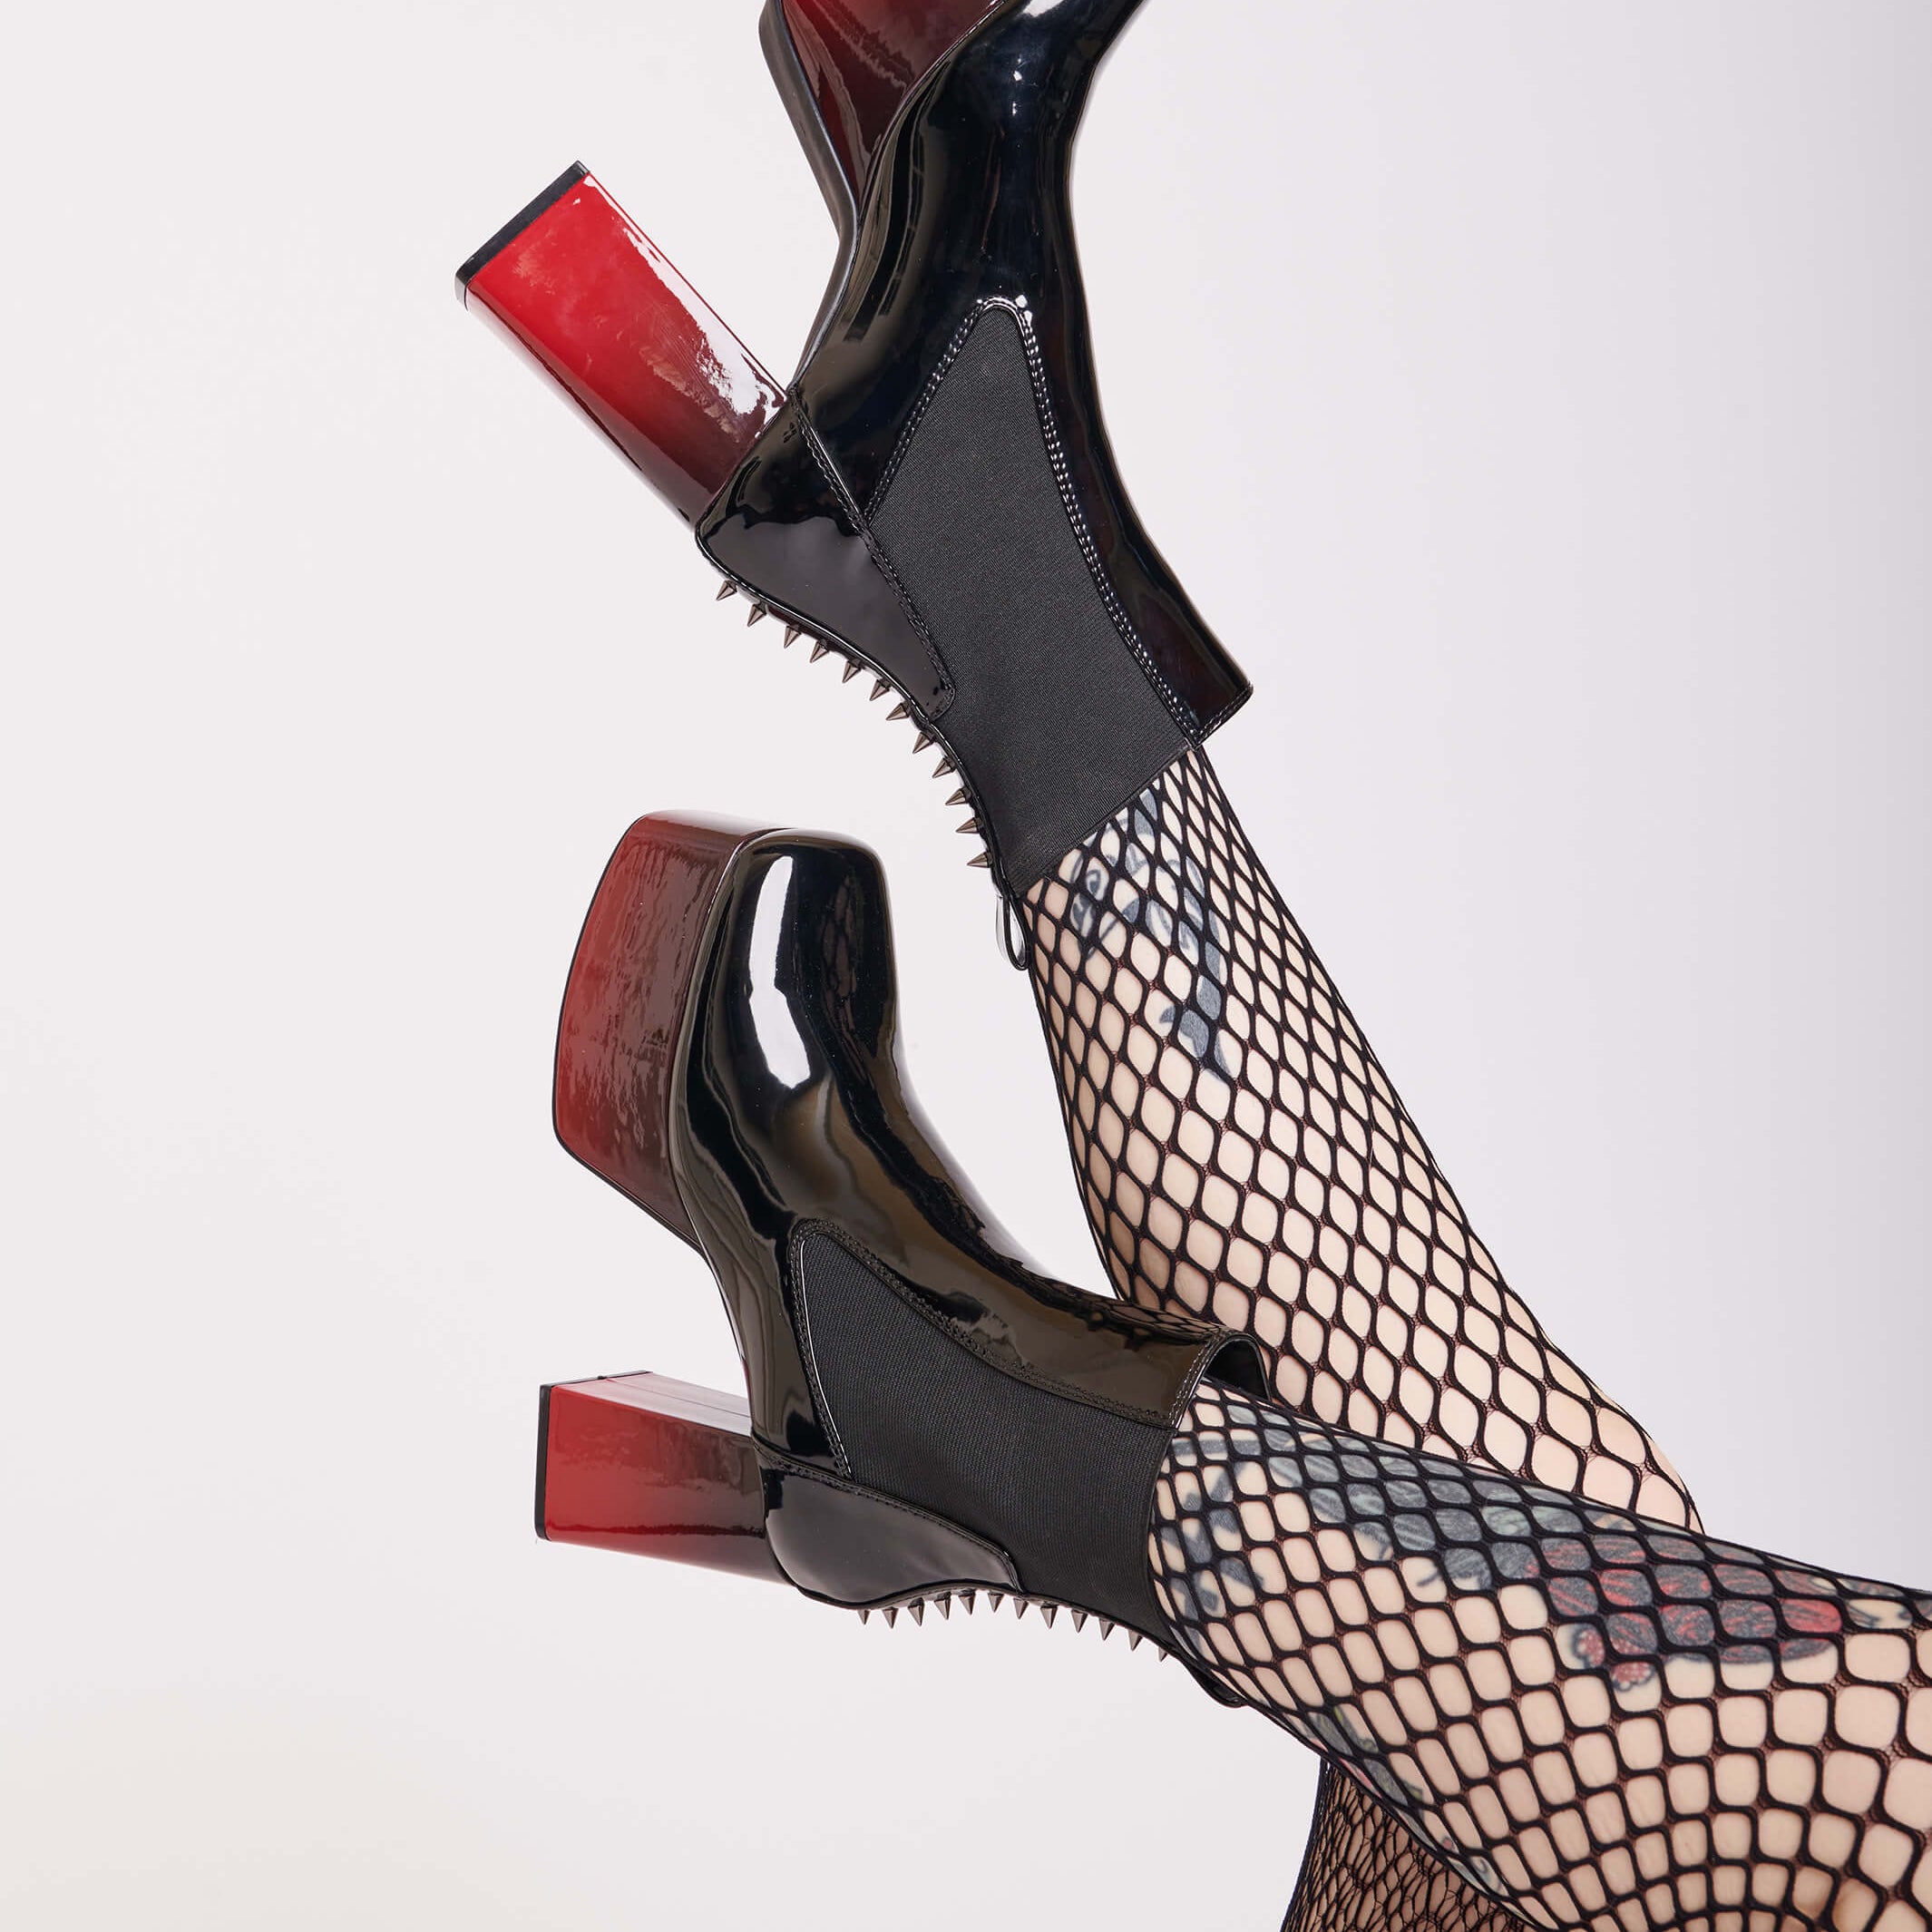 ombre red and black vegan patent leather platform boots with spikes down the back